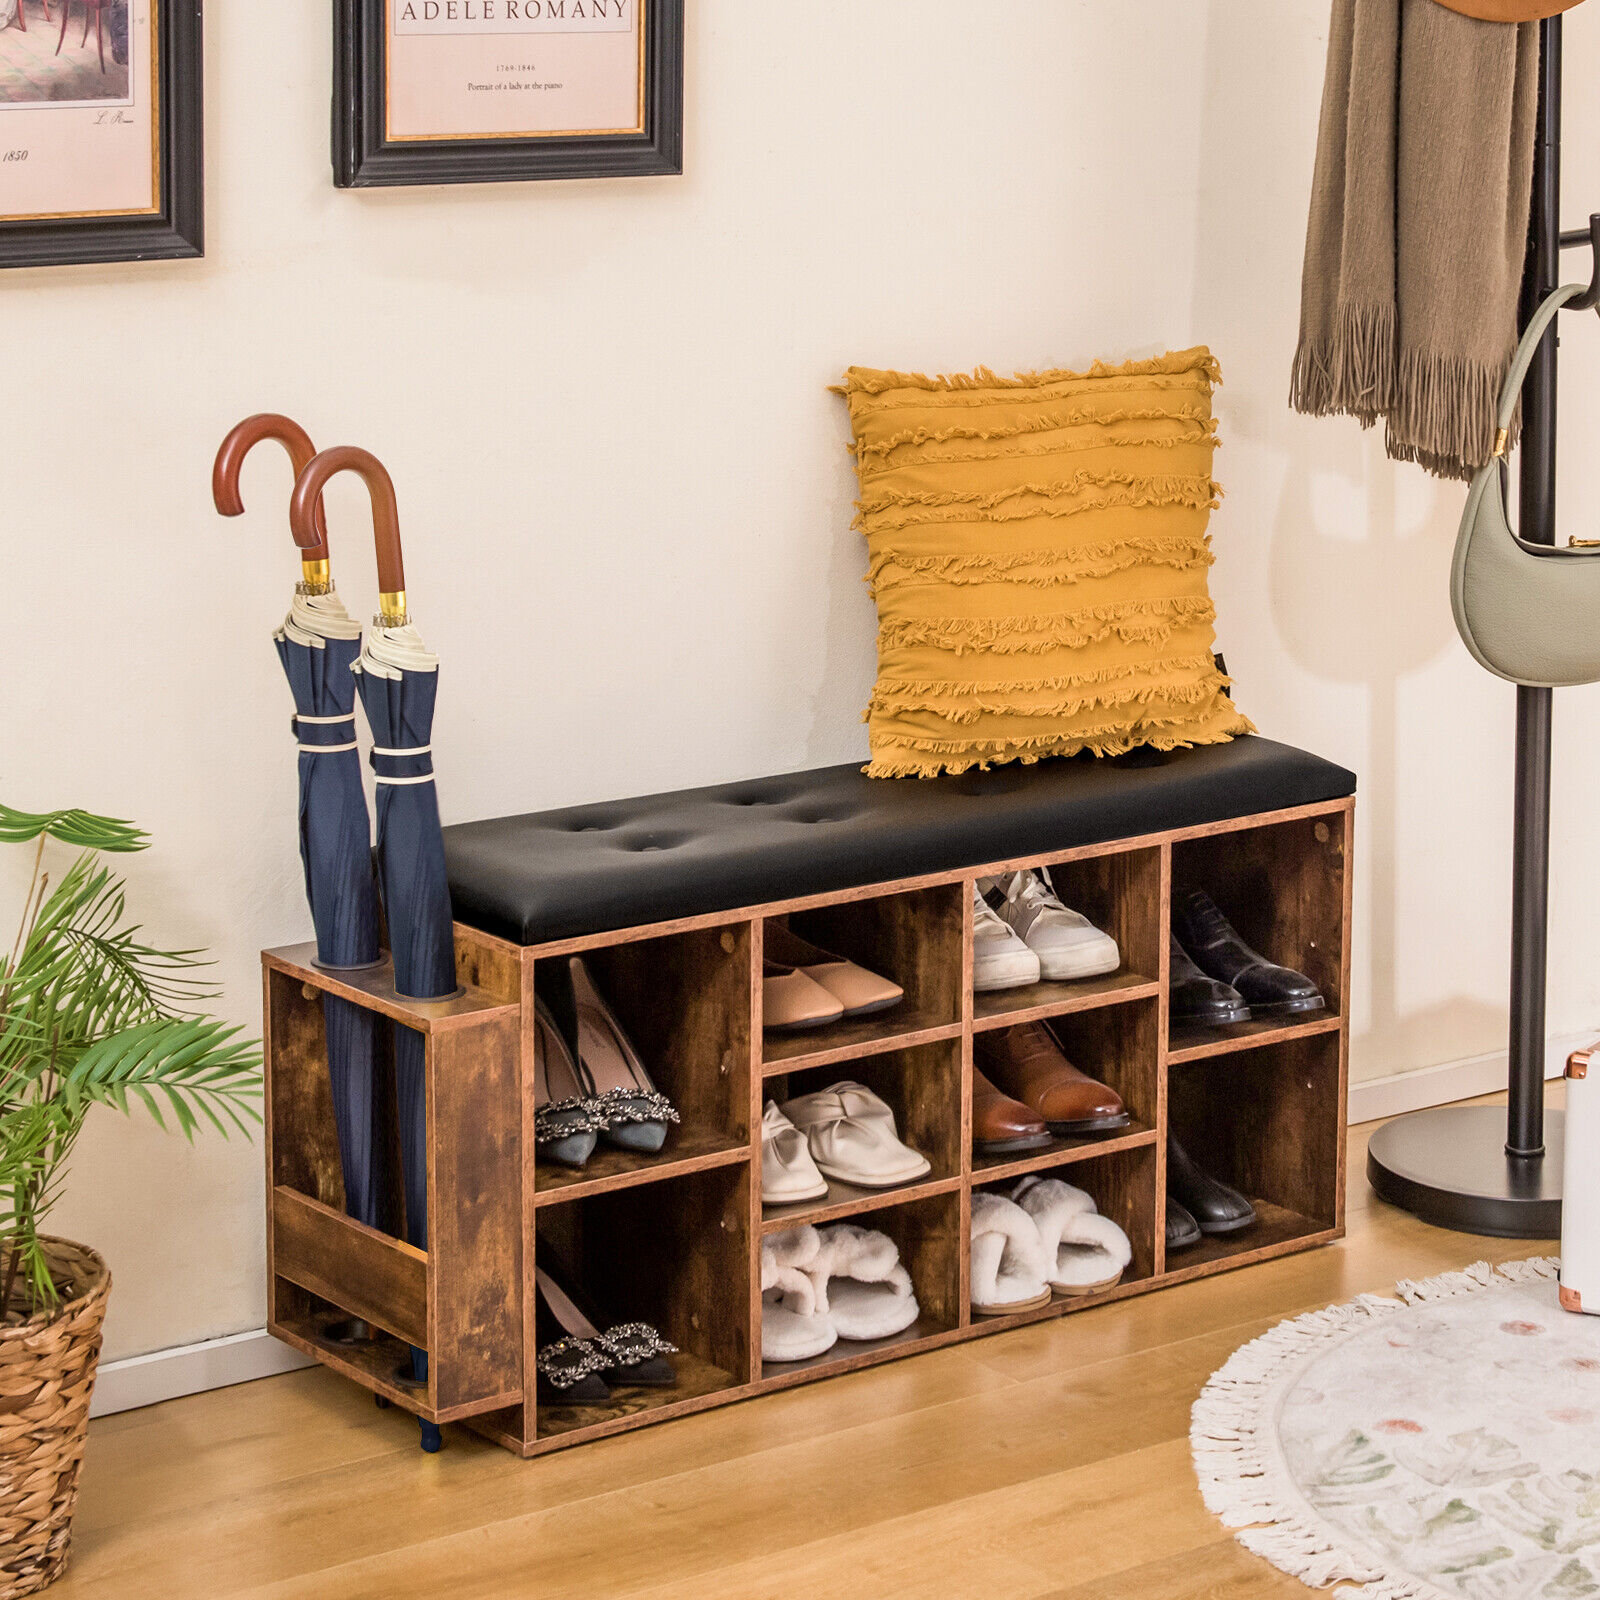 Komfort shoe rack, the practical solution to organize your clothes and shoes